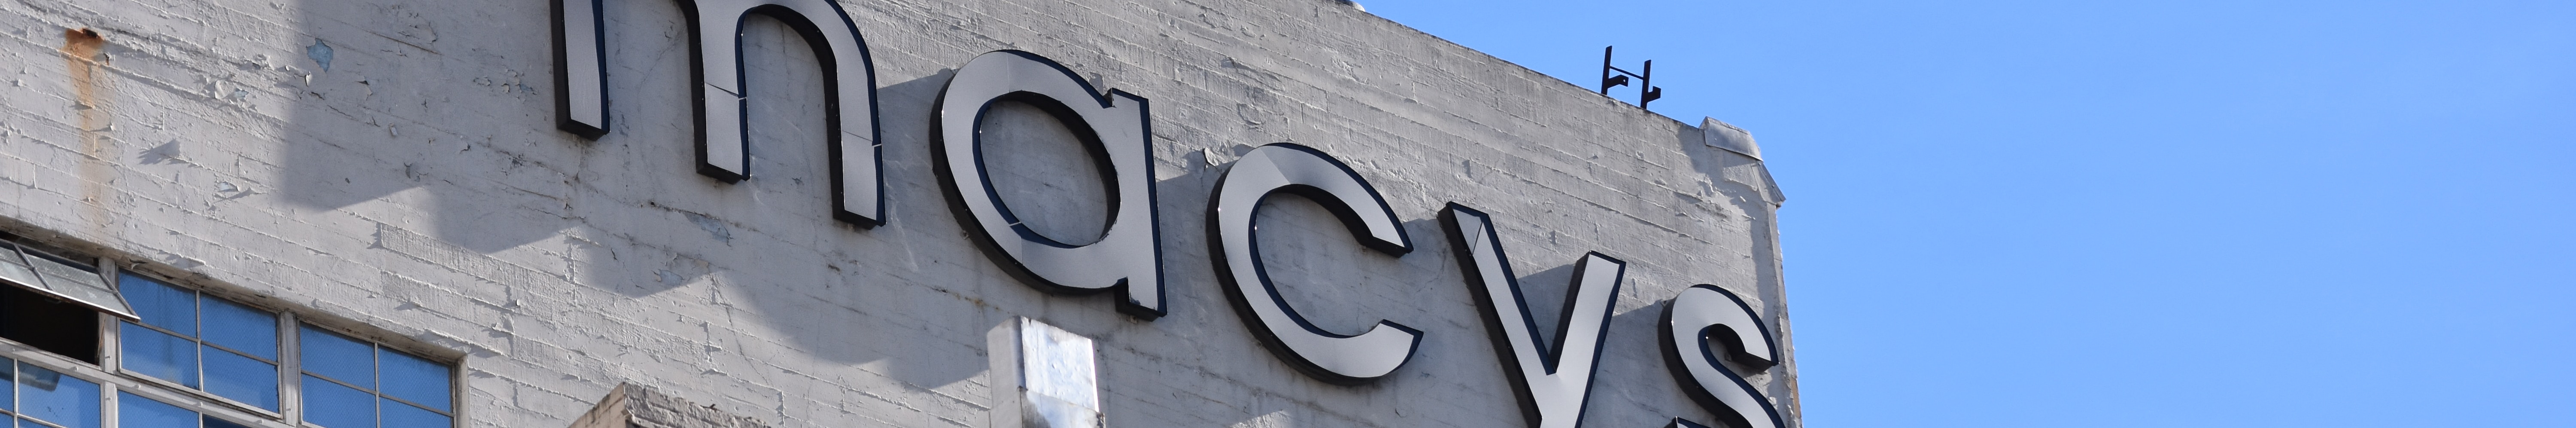 Macy's closed 30 stores and cut off 3,900 jobs in 2020, and yet gave bonuses to its top executives